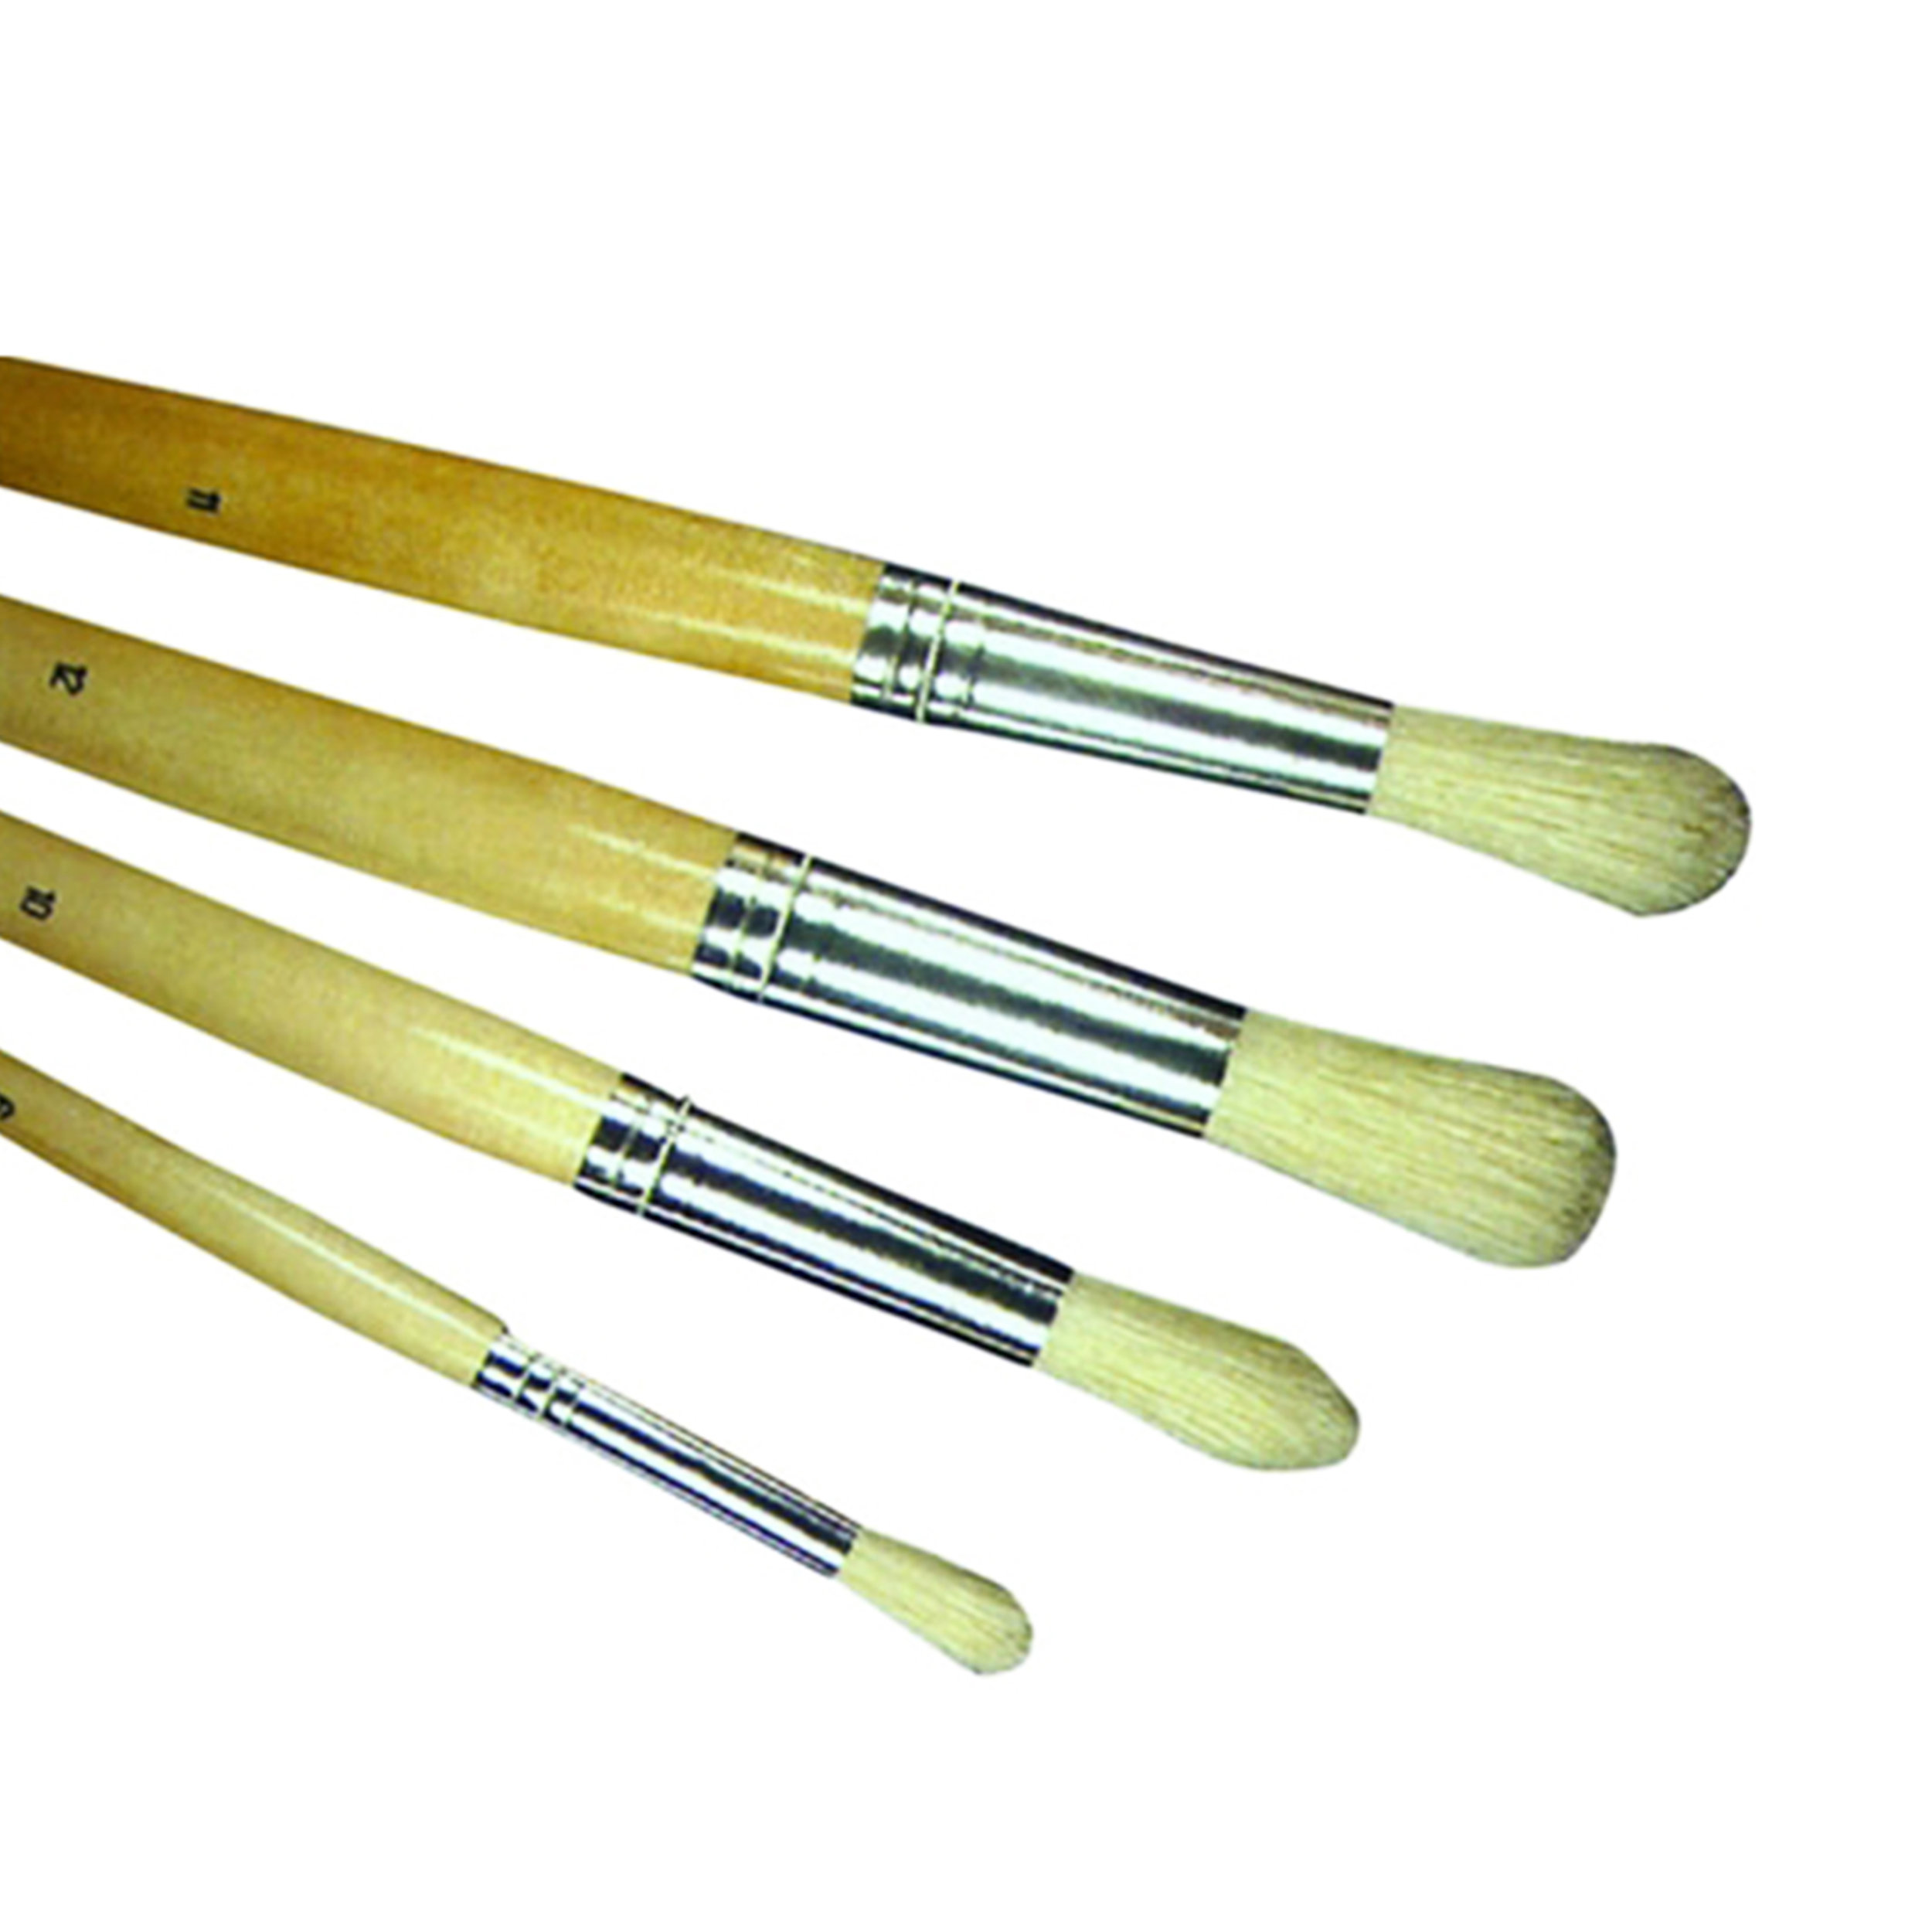  Jerry Q Art 12 PC Brown Synthetic Hair Round and Flat Paint  Brush Set with Short Wood Handles for Acrylic, Watercolor and All Media  JQ59831